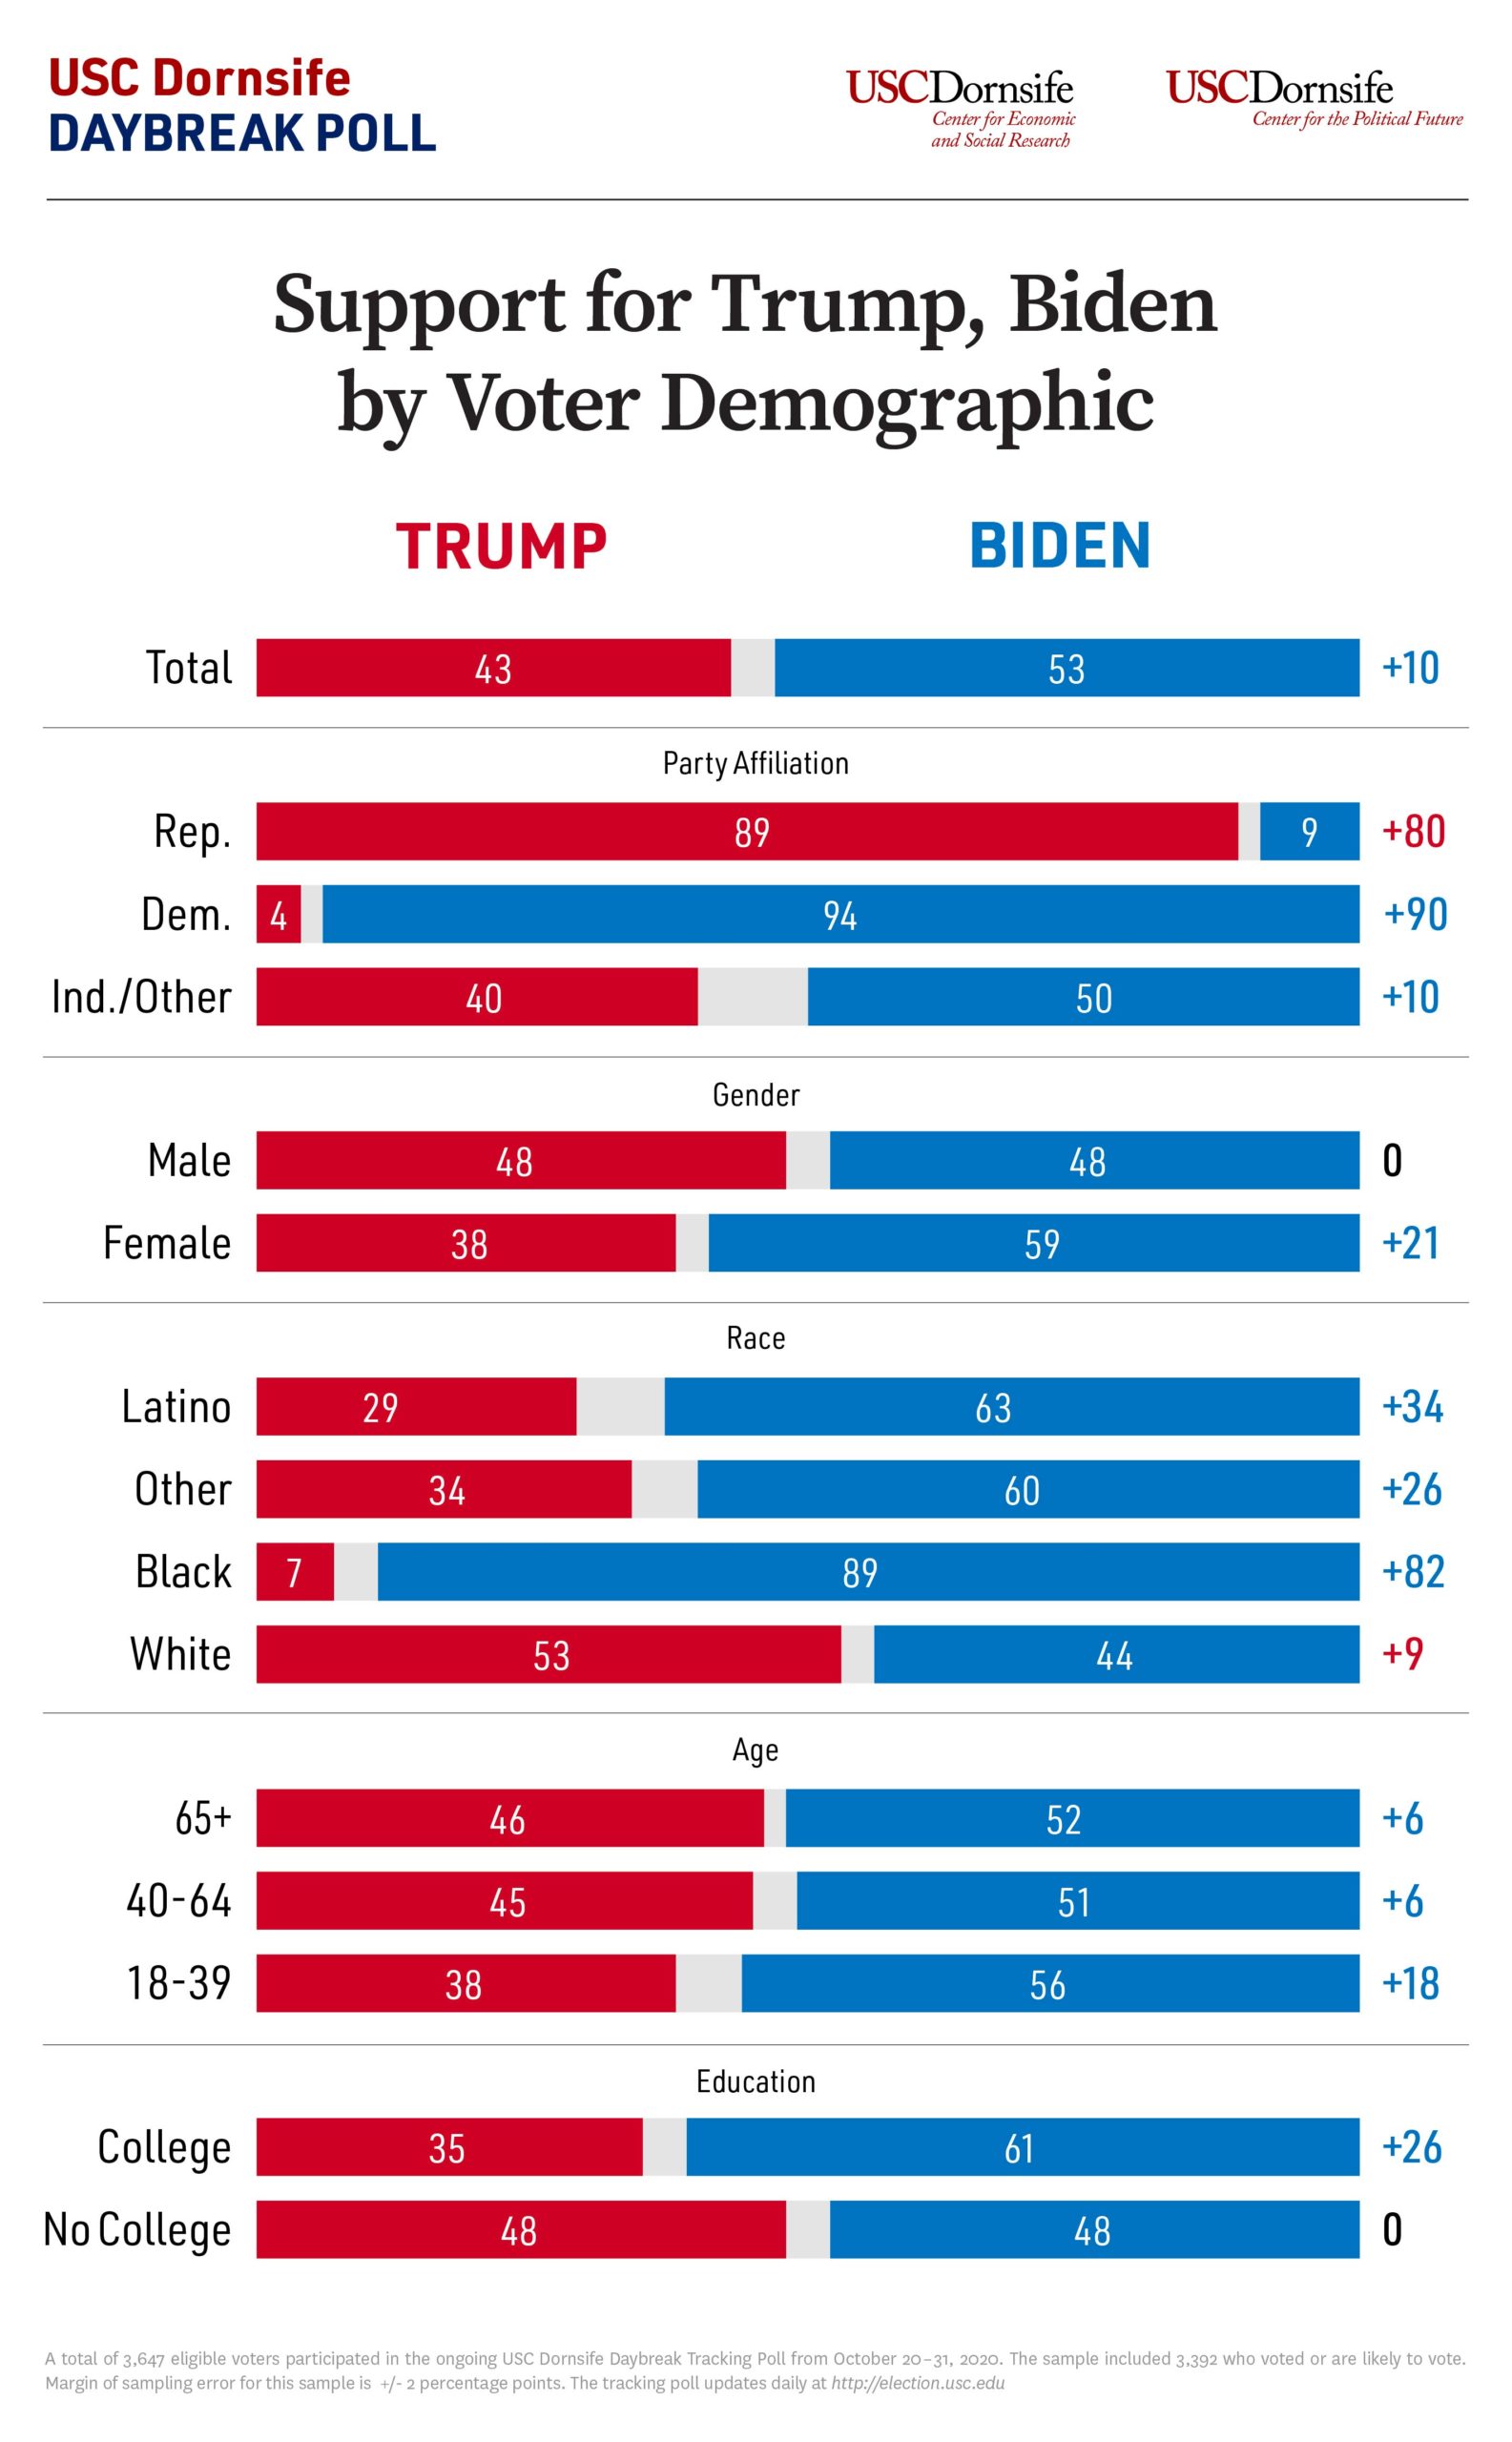 Chart shows support for President Trump and former Vice President Biden among voters overall and in various demographic populations including political party, gender, race, age and college education.